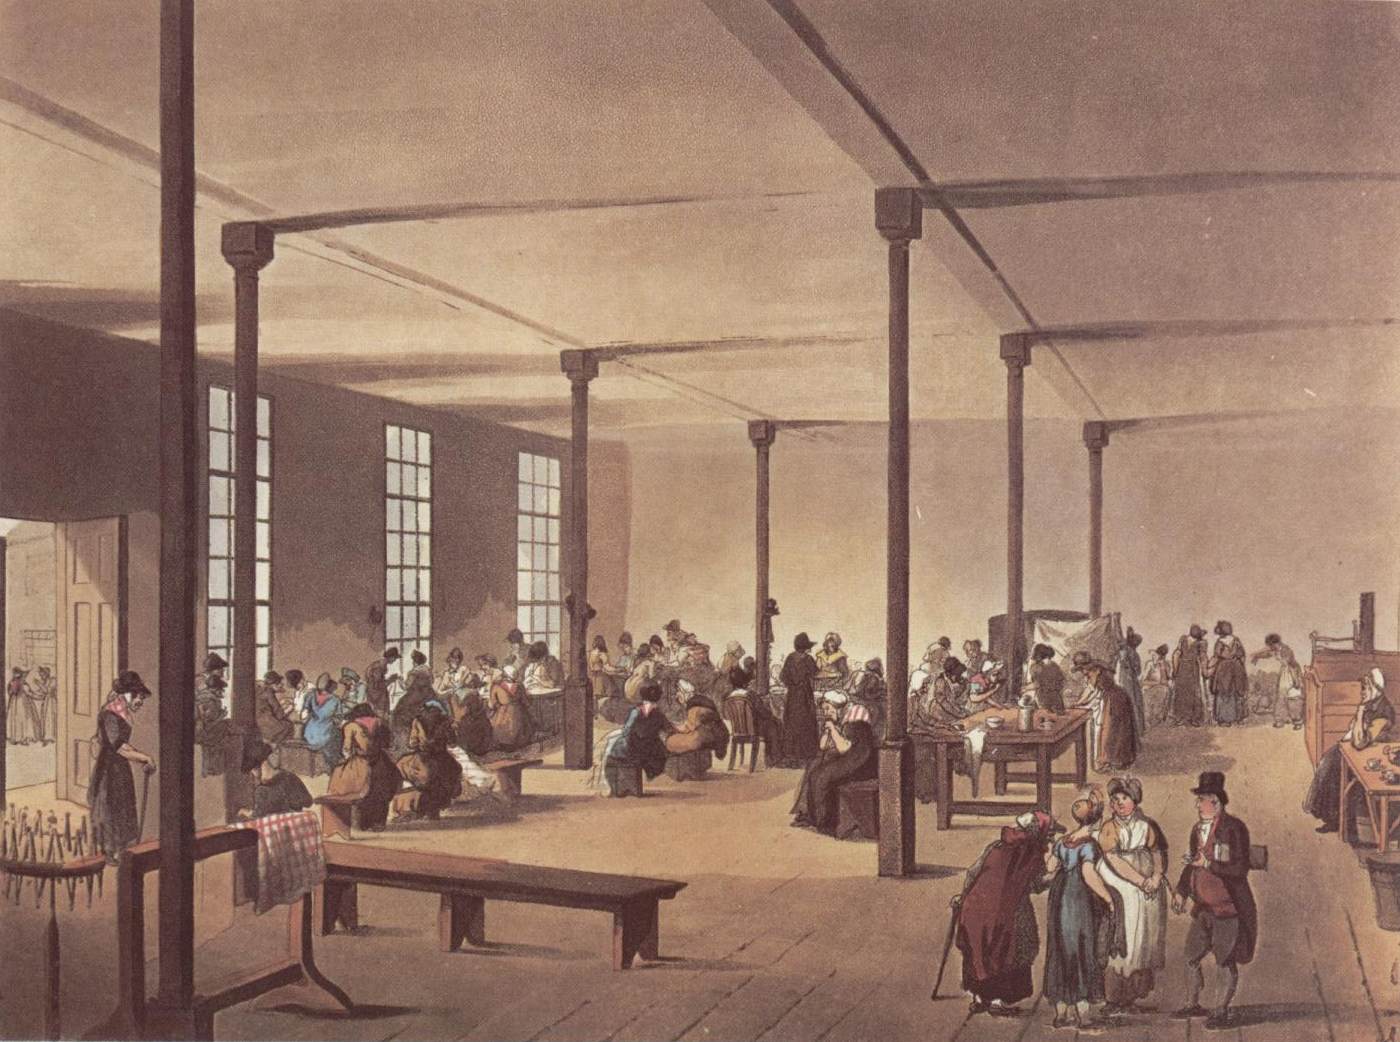 The workroom at St James's workhouse, showing women sitting at workbenches and a number of better dressed visitors in the foreground